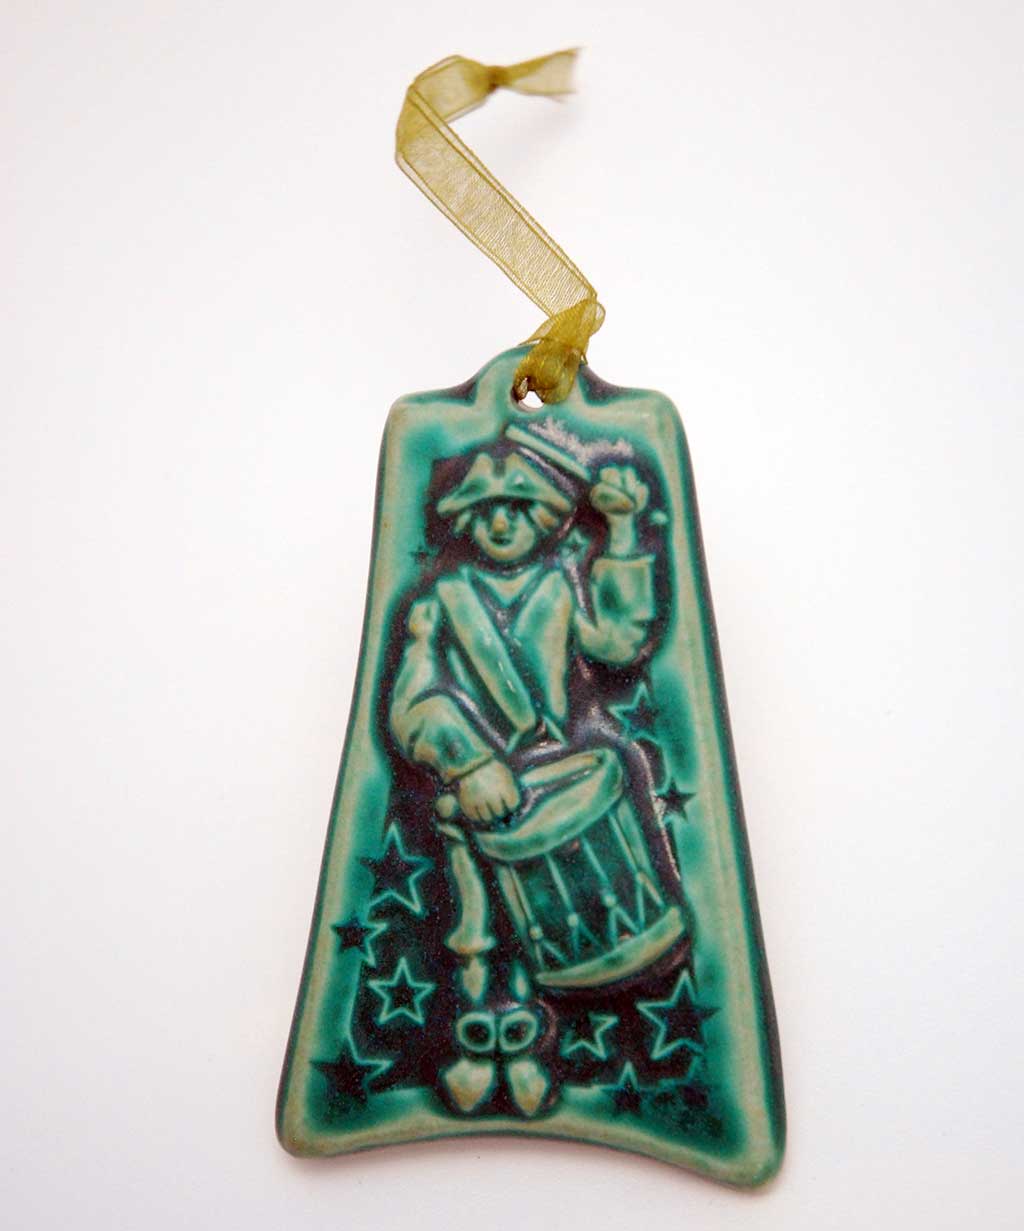 Pewabic, 12 Days of Christmas ornament (12 Drummers Drumming)